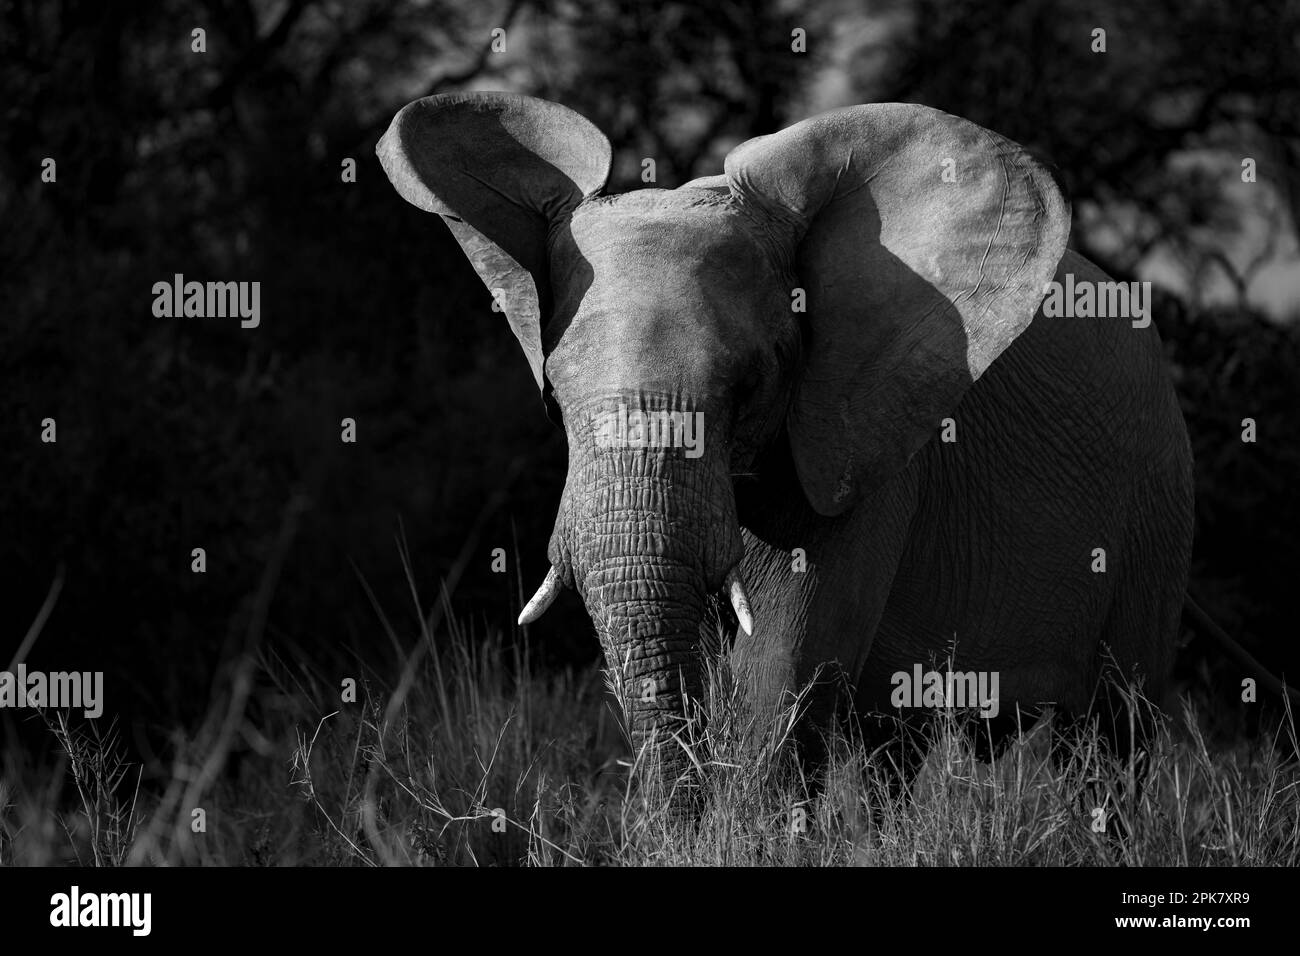 An elephant, Loxodonta africana, flapping its ears, in black and white. Stock Photo